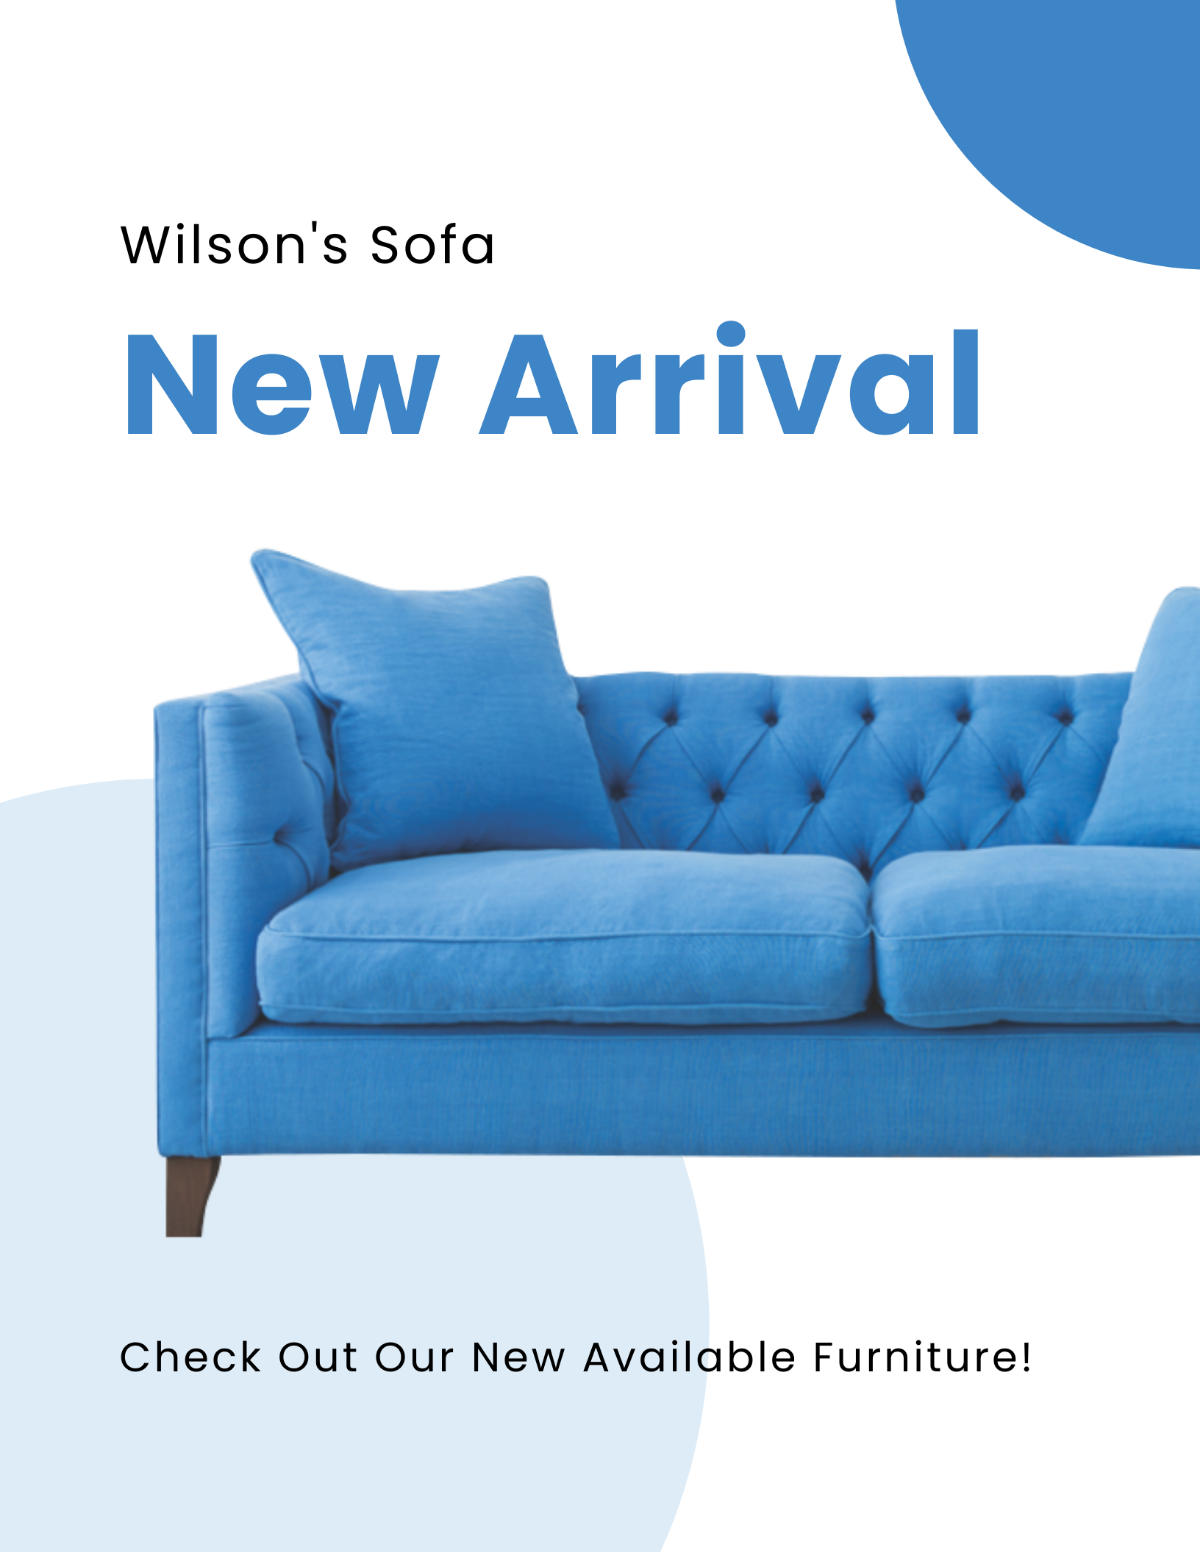 New Furniture Arrival Flyer Template